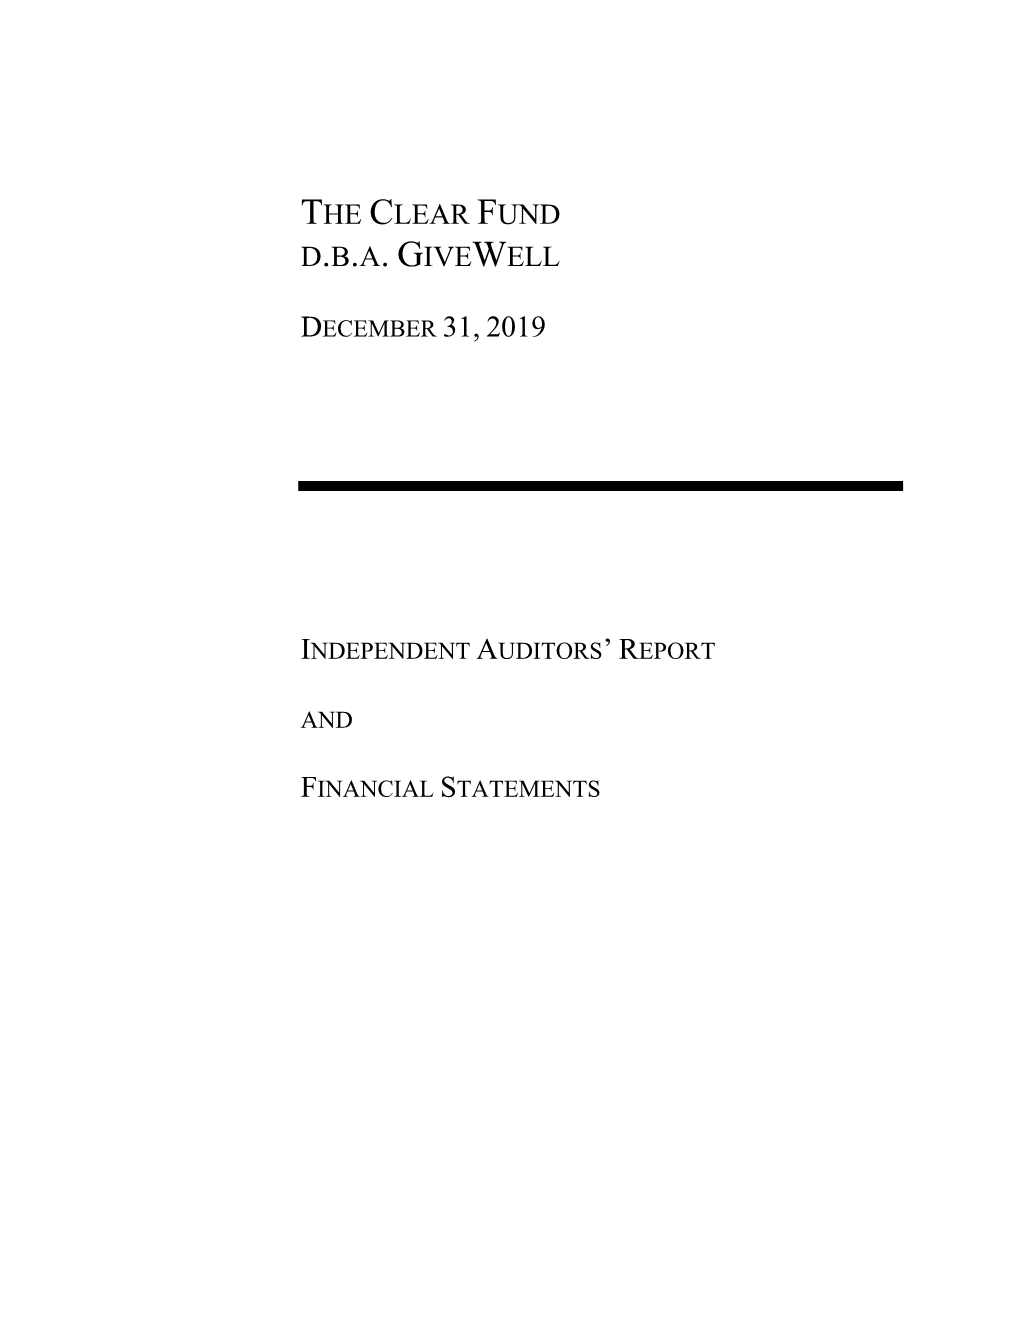 Clear Fund 2019 Audited Financial Statements